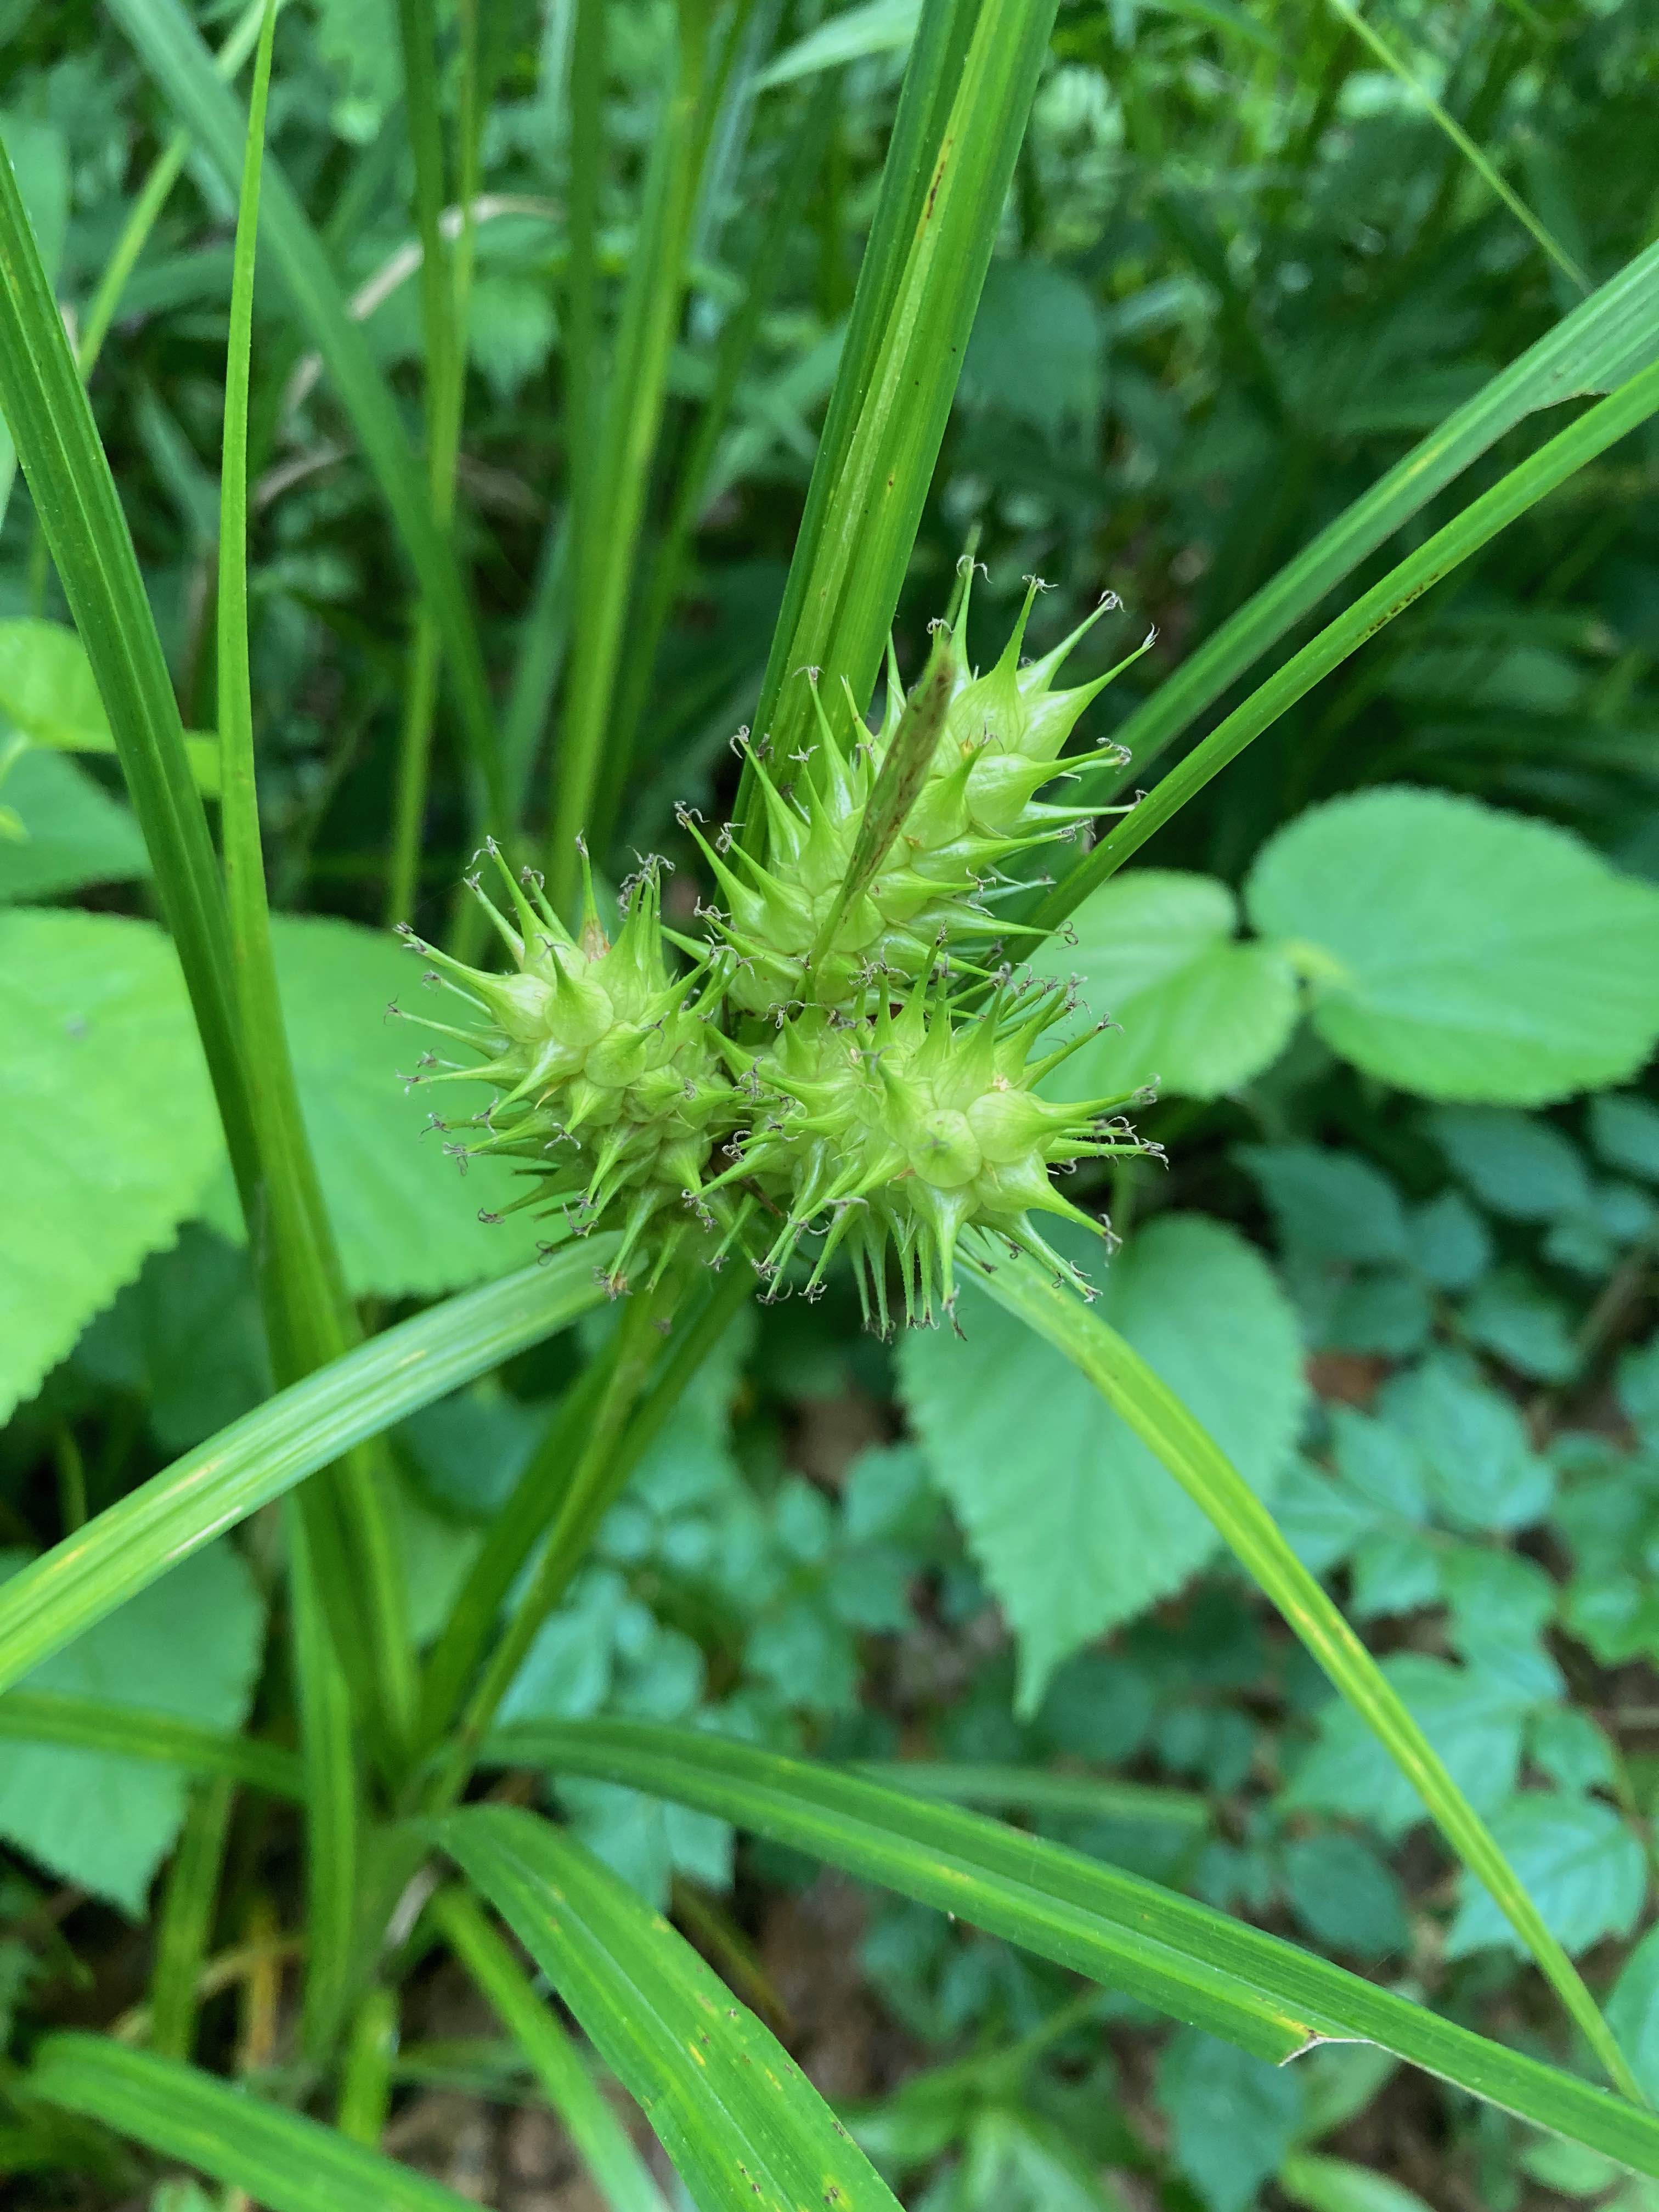 The Scientific Name is Carex lupulina. You will likely hear them called Hop Sedge. This picture shows the The female spikes have a broadly cylindric shape and are usually crowded. of Carex lupulina